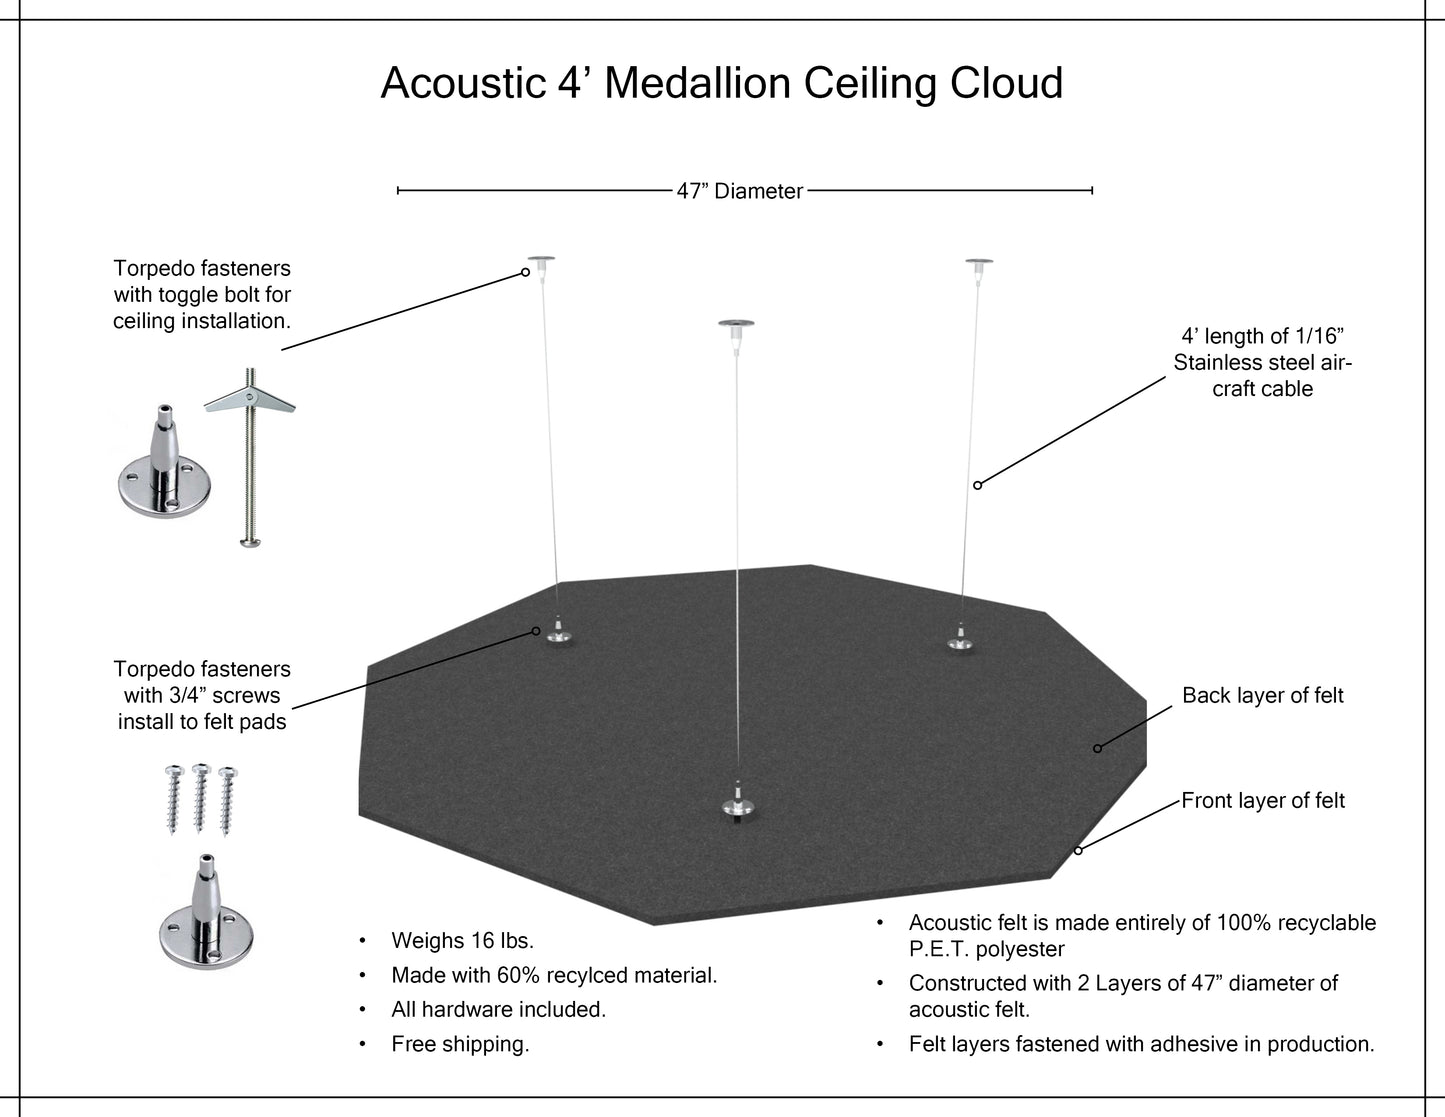 Medallion Acoustic Ceiling Cloud - Urban Topography